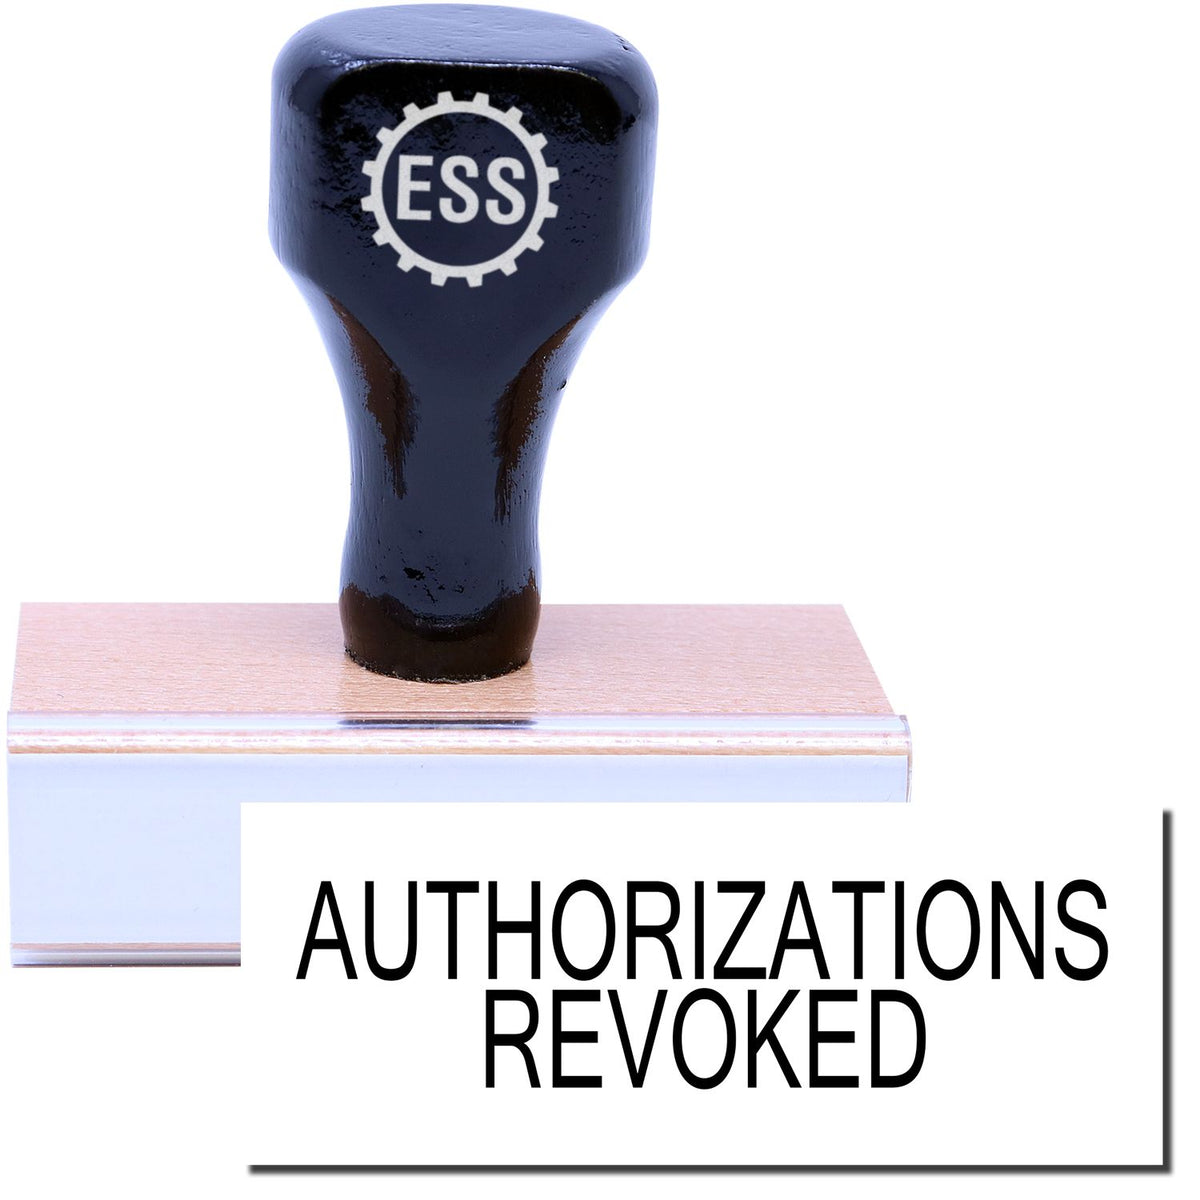 A stock office rubber stamp with a stamped image showing how the text &quot;AUTHORIZATIONS REVOKED&quot; in a large font is displayed after stamping.